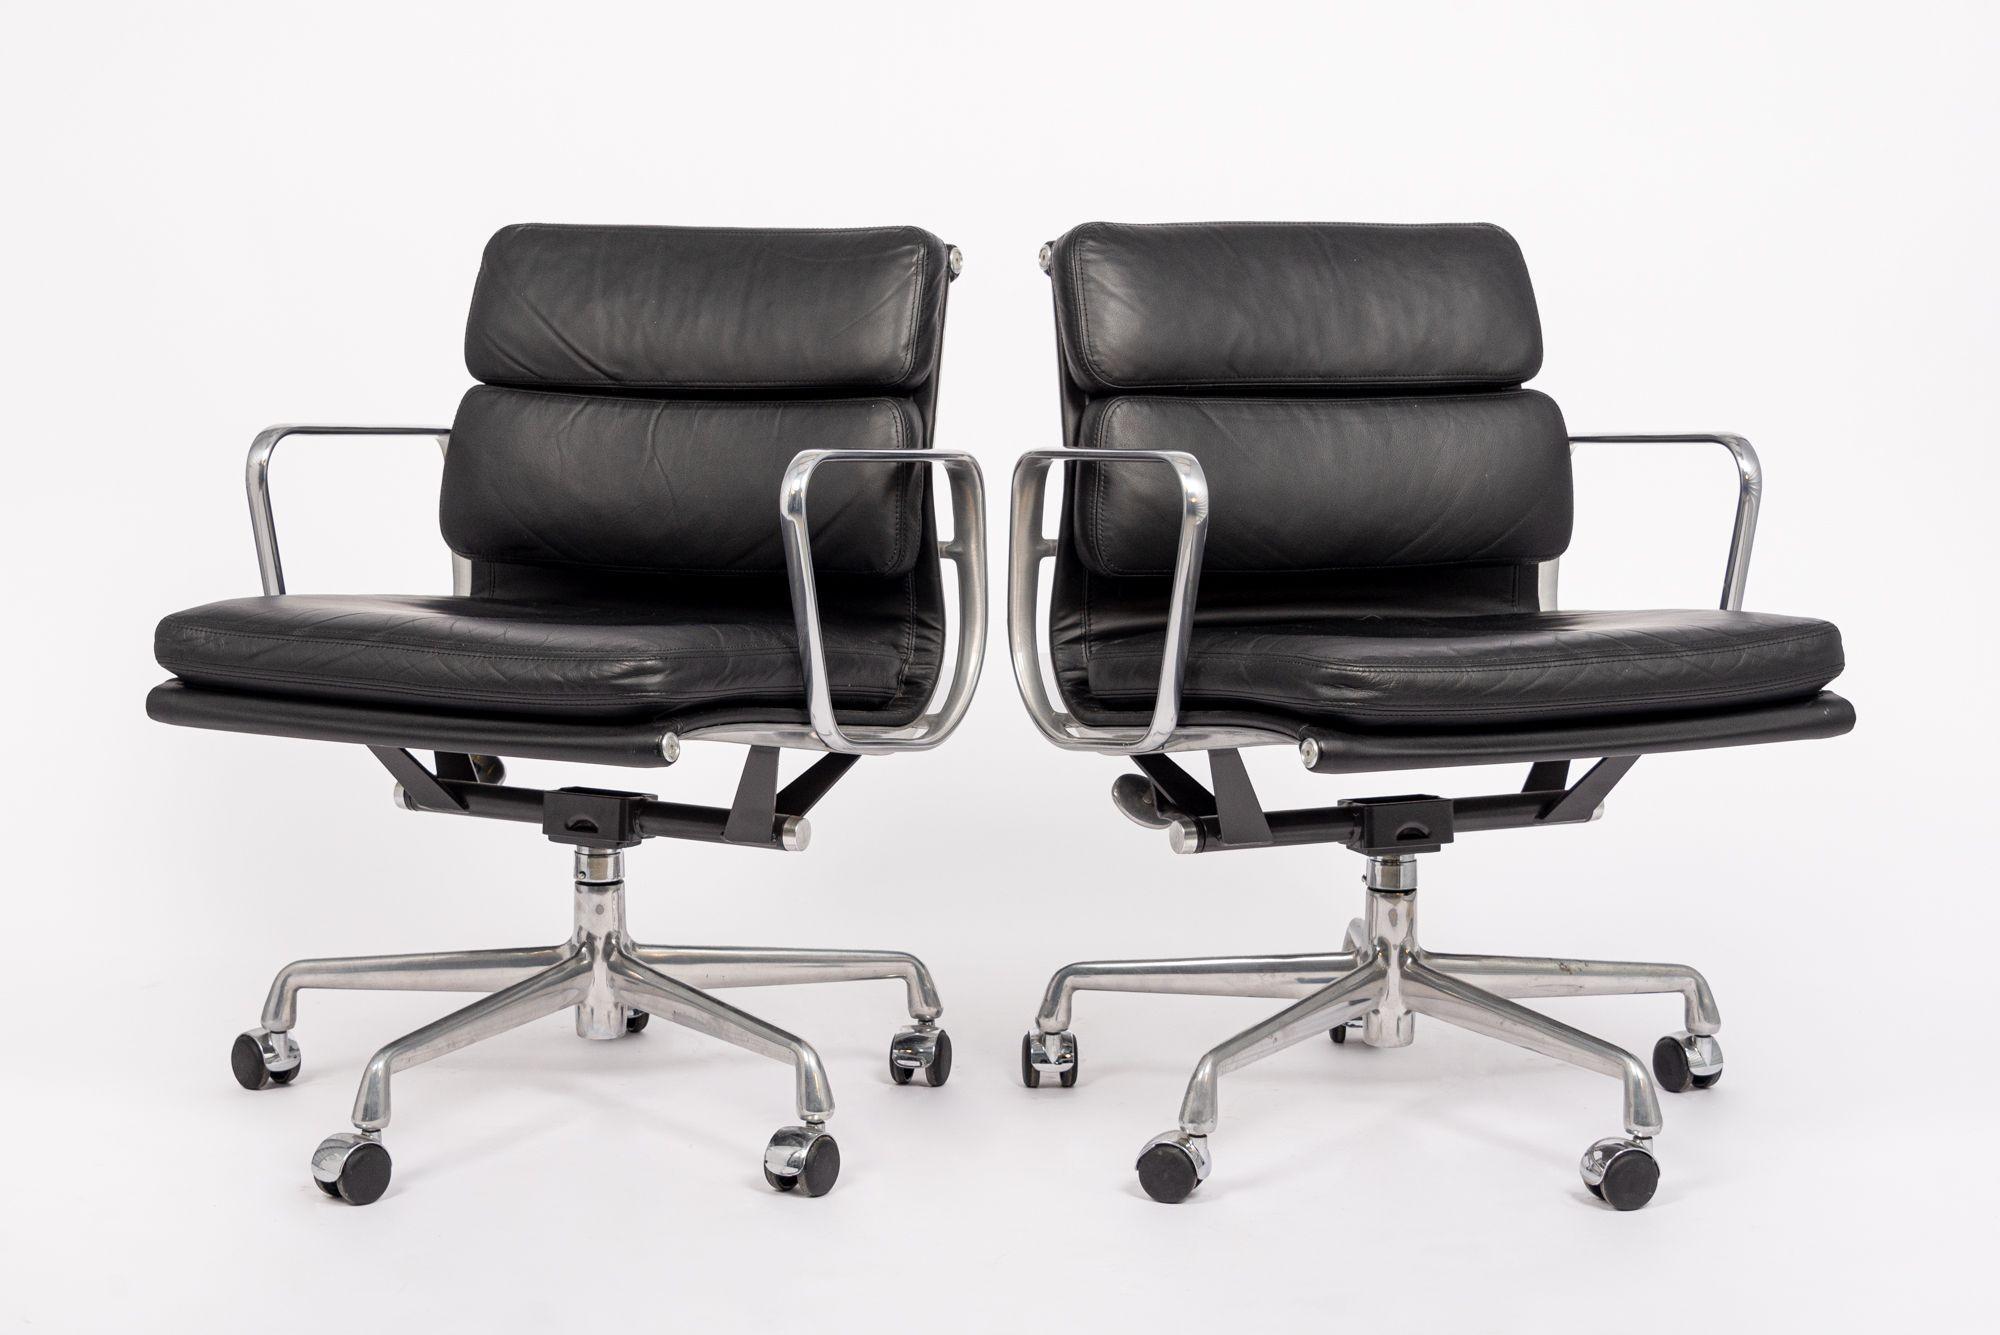 These authentic Eames for Herman Miller Soft Pad Management Height black leather office chairs from the Aluminum Group Collection were manufactured in the 2001. This classic mid century modern office chair was first introduced in 1969 by Charles and